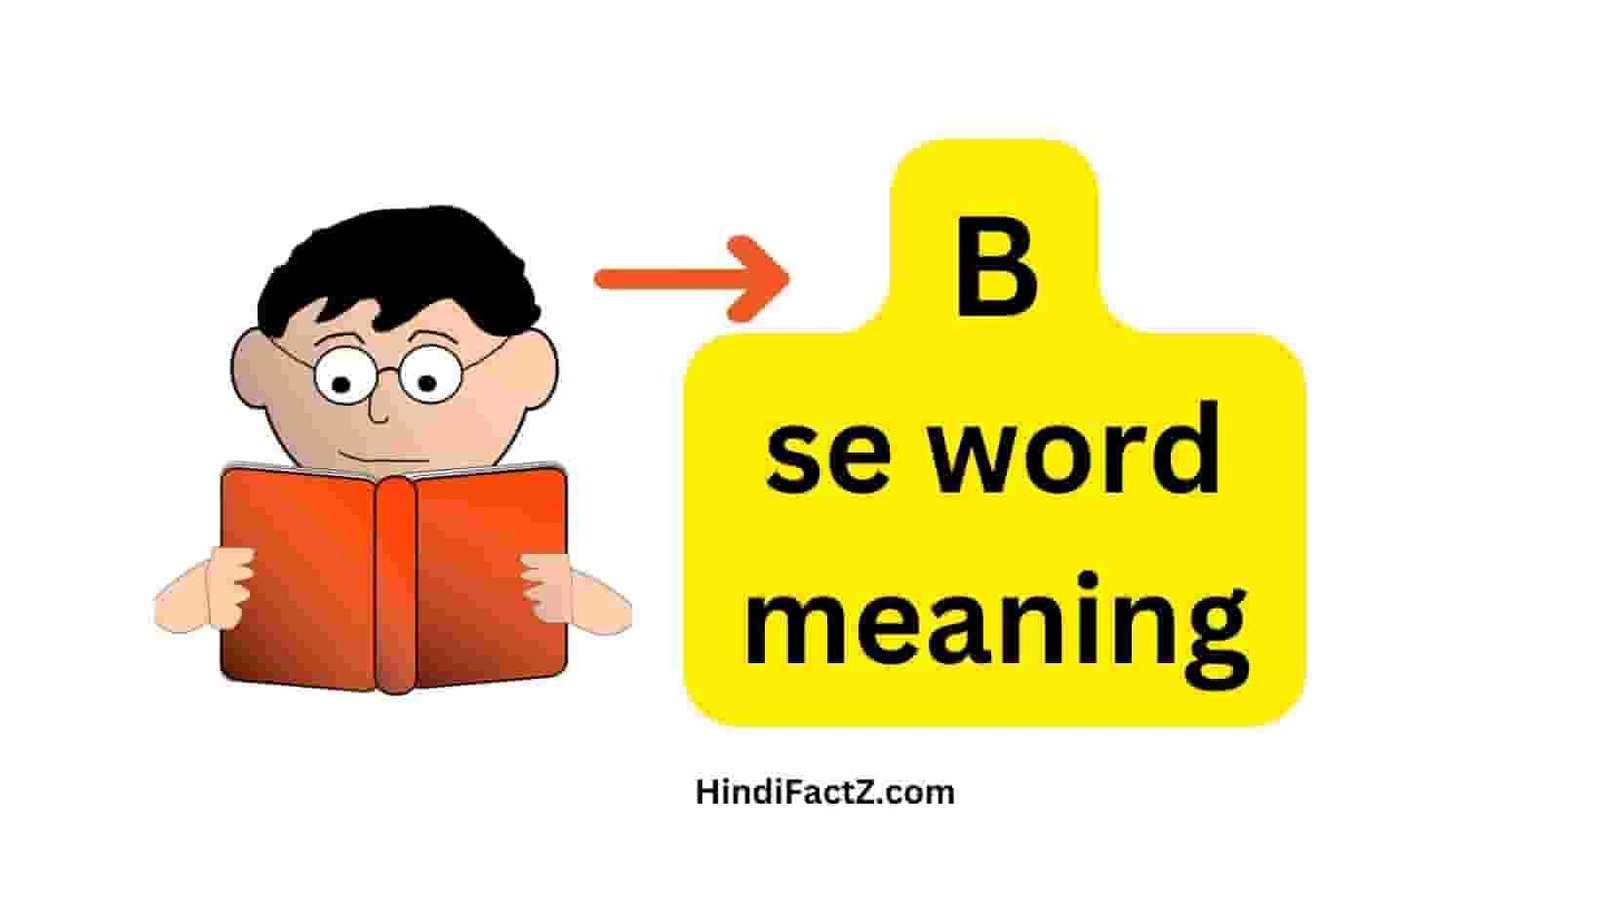 B se word meaning